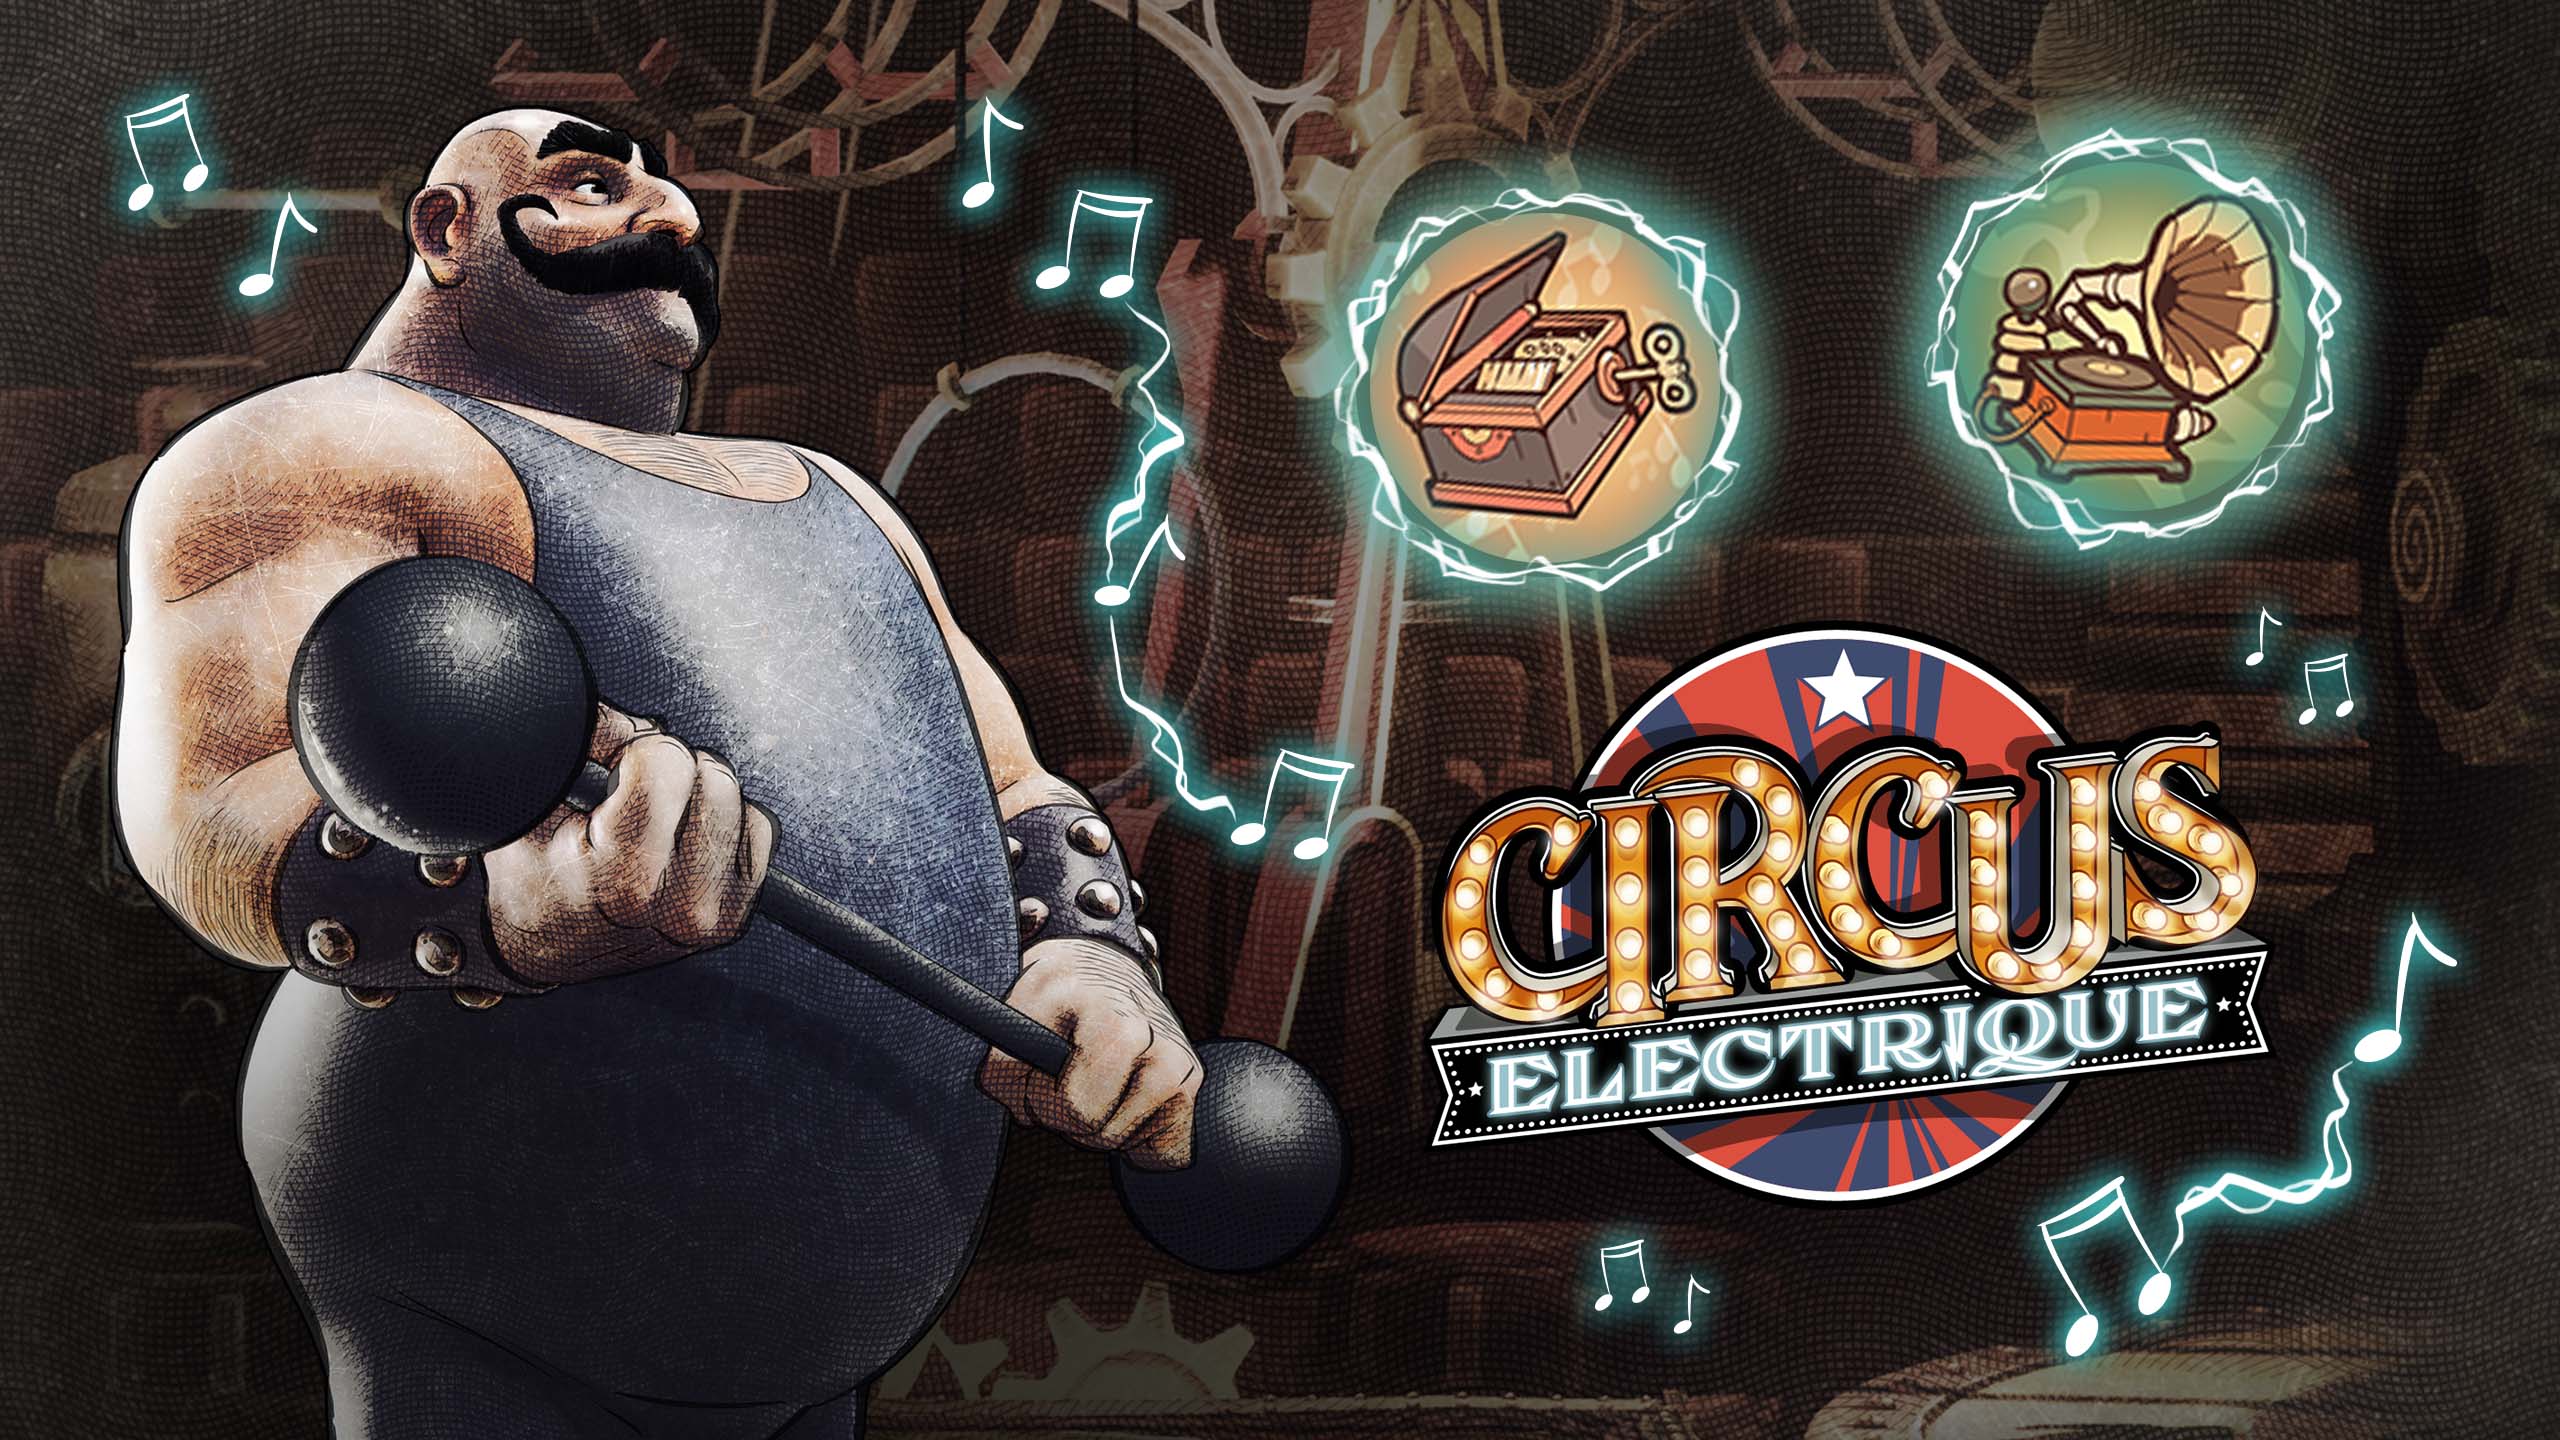 Circus Electrique download the last version for ipod